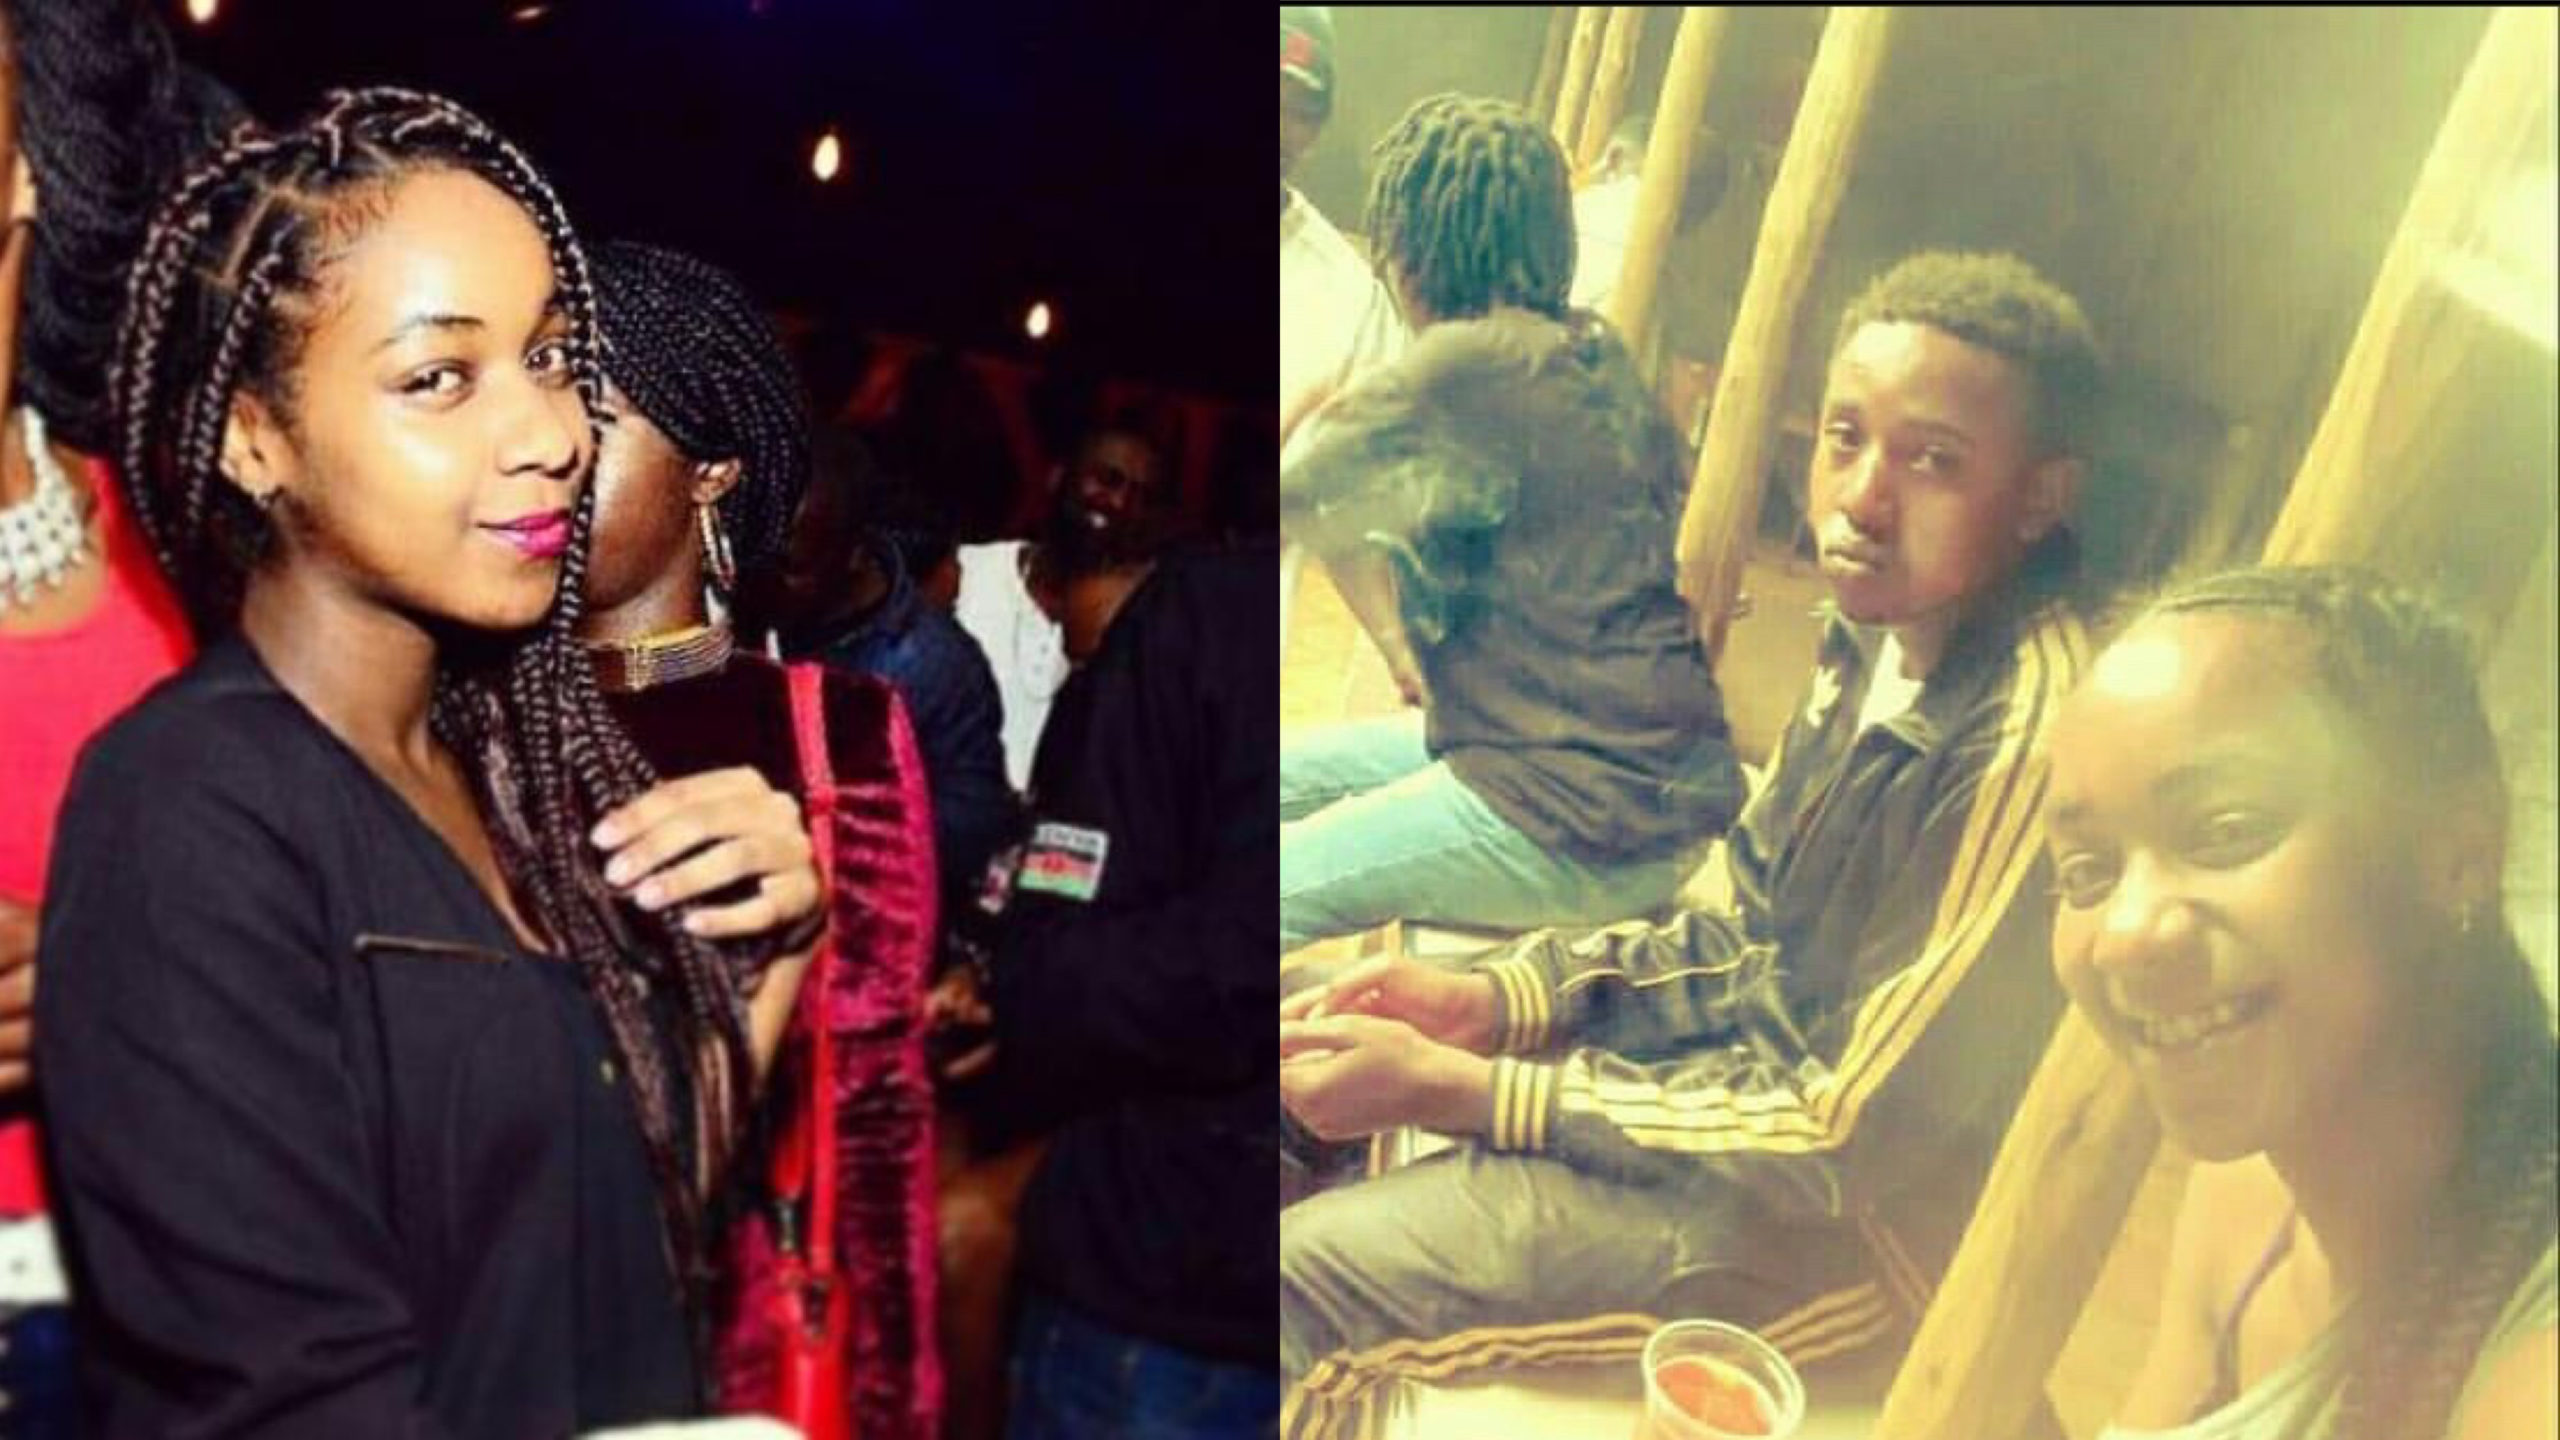 Call for help? 26 year old Vanessa Chettle’s latest photo leaves netizens worried about her drug addiction and mental health